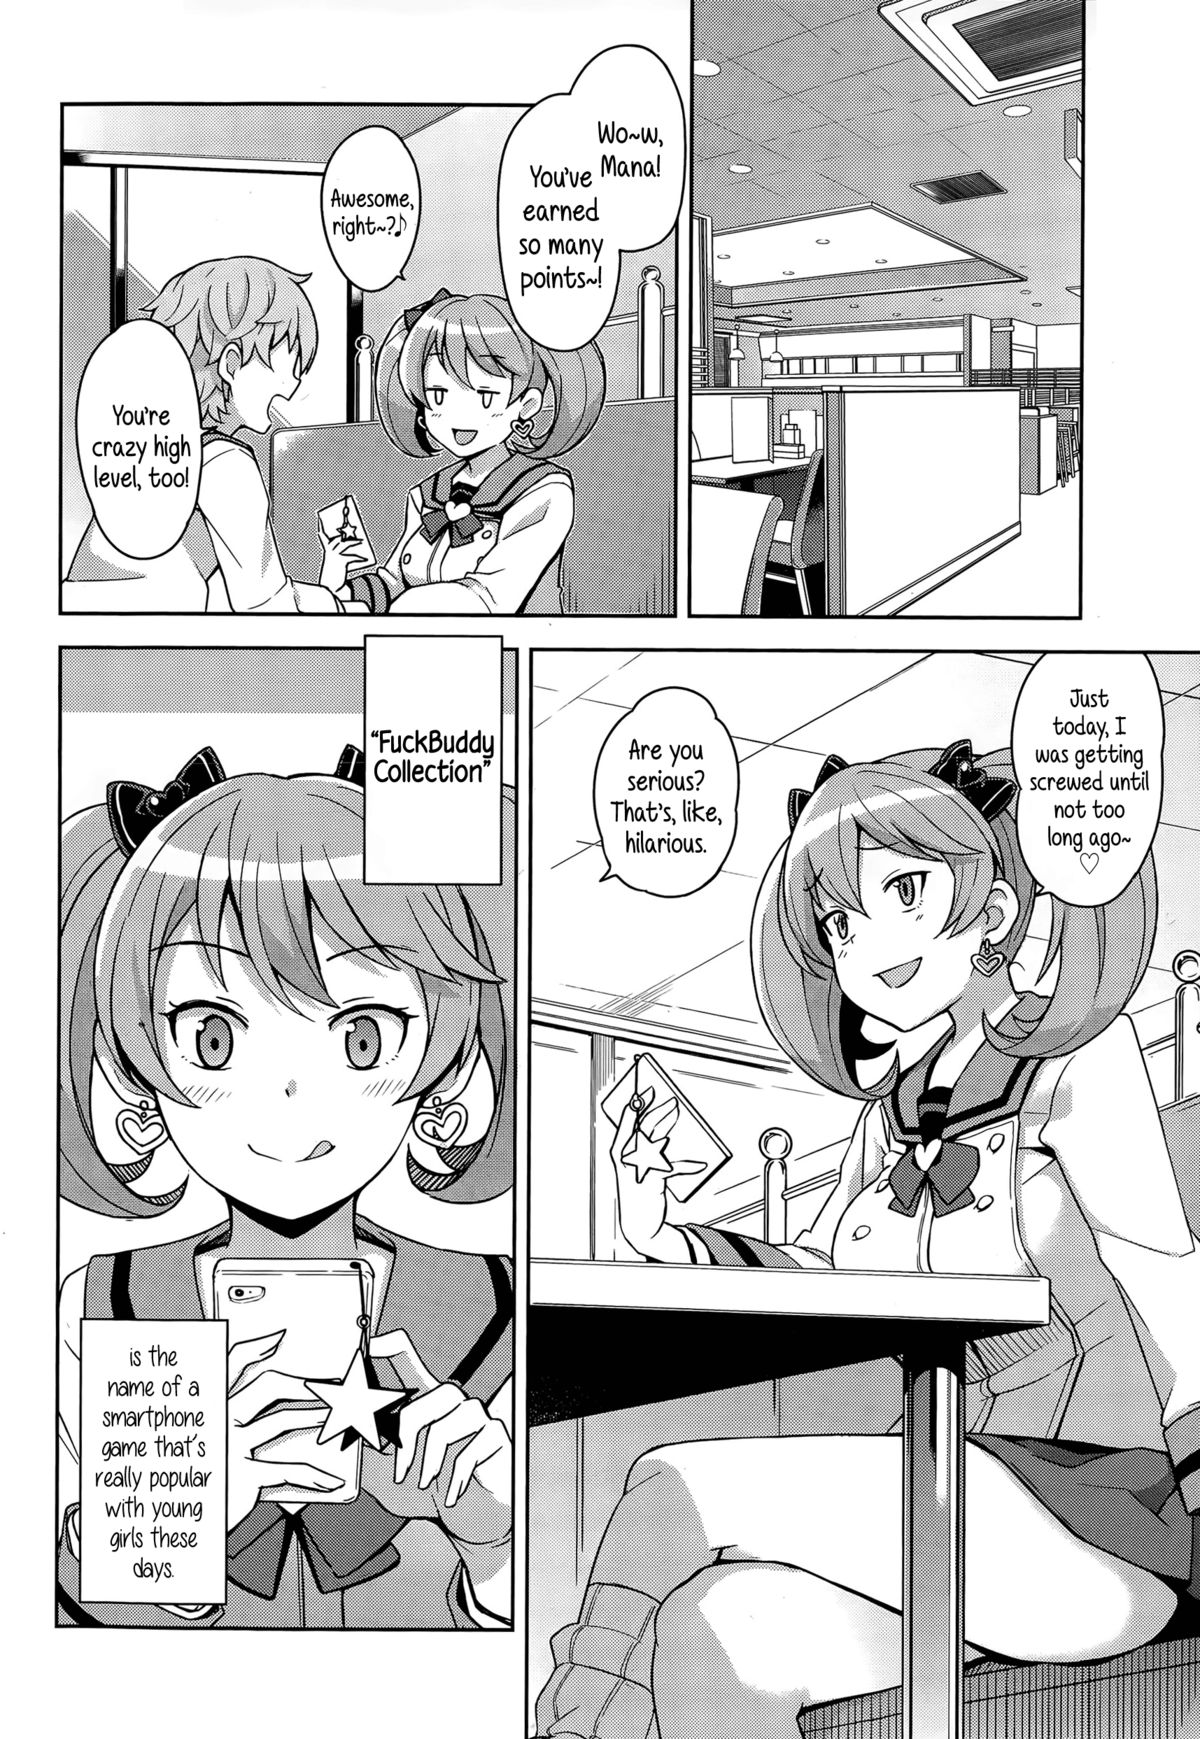 [Tamagoro] Hametomo Collection Ch. 1-2 | FuckBuddy Collection Ch. 1-2 [English] {5 a.m.} page 4 full